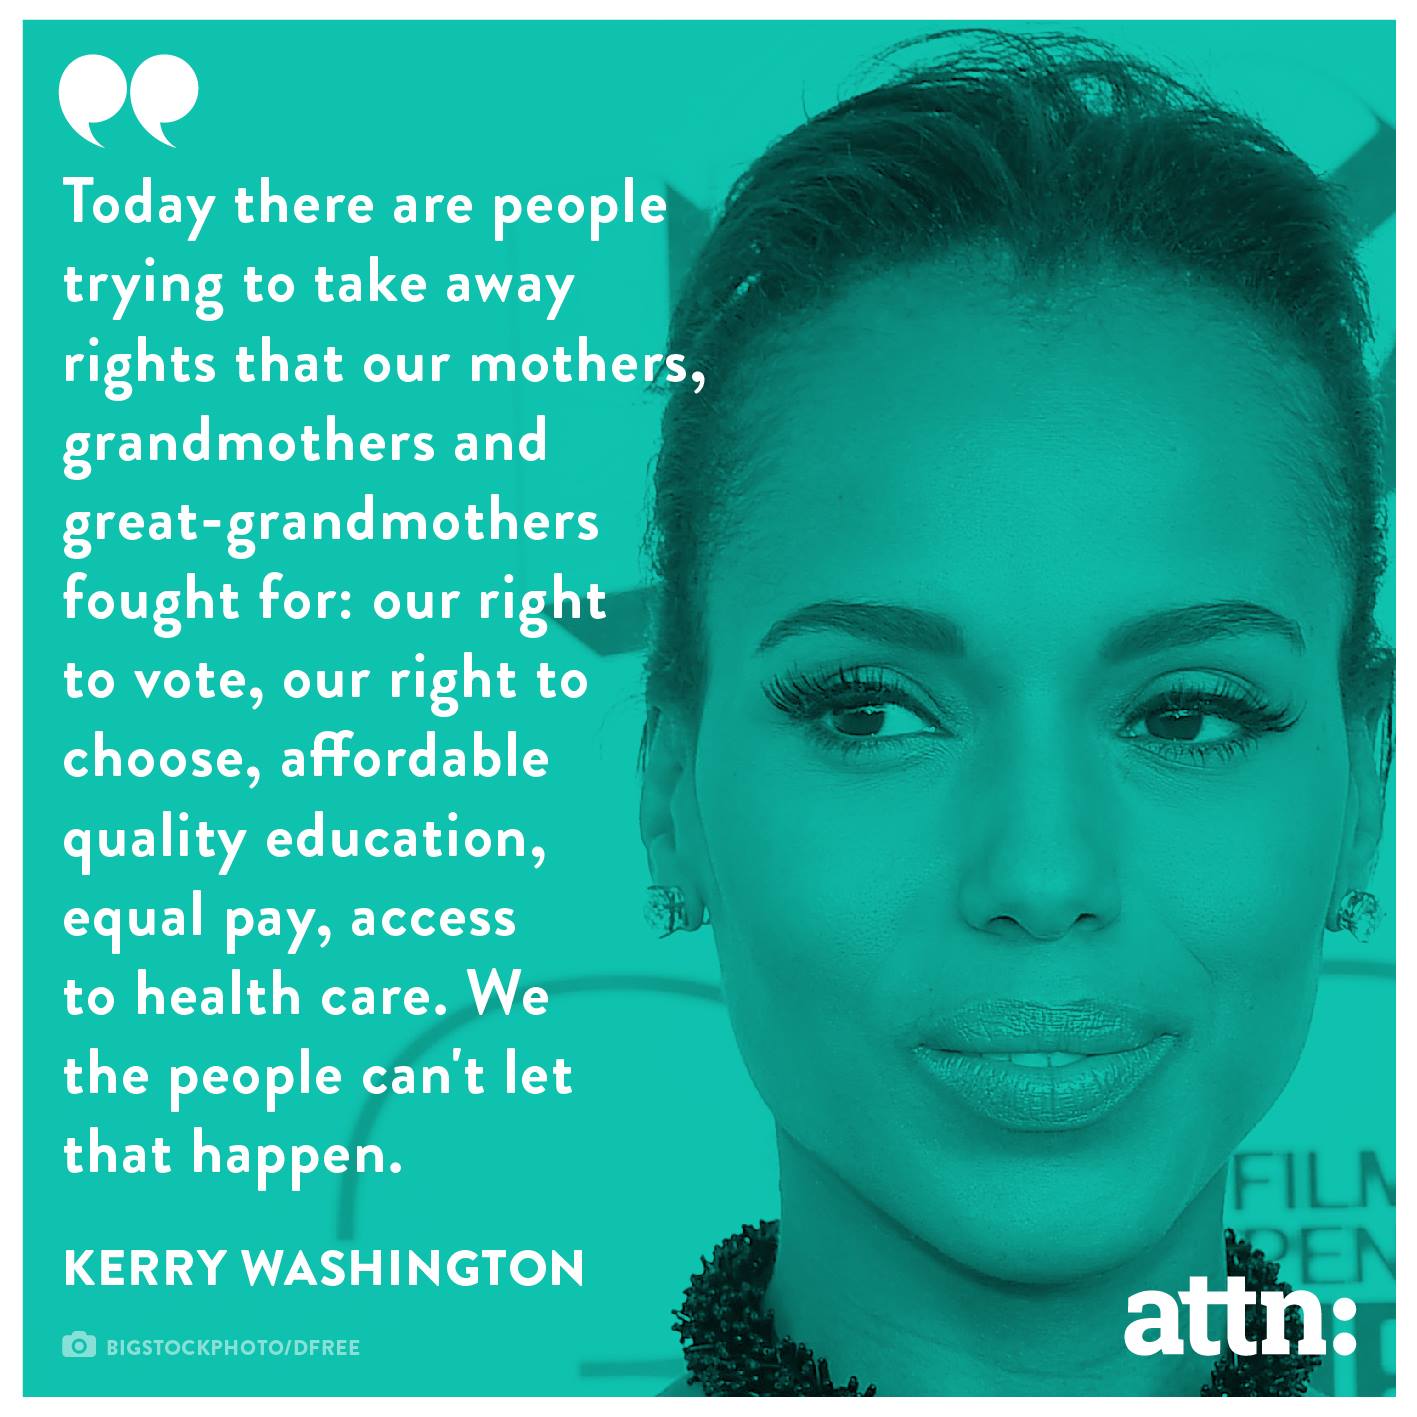 Kerry Washington nails it in this feminist quote.